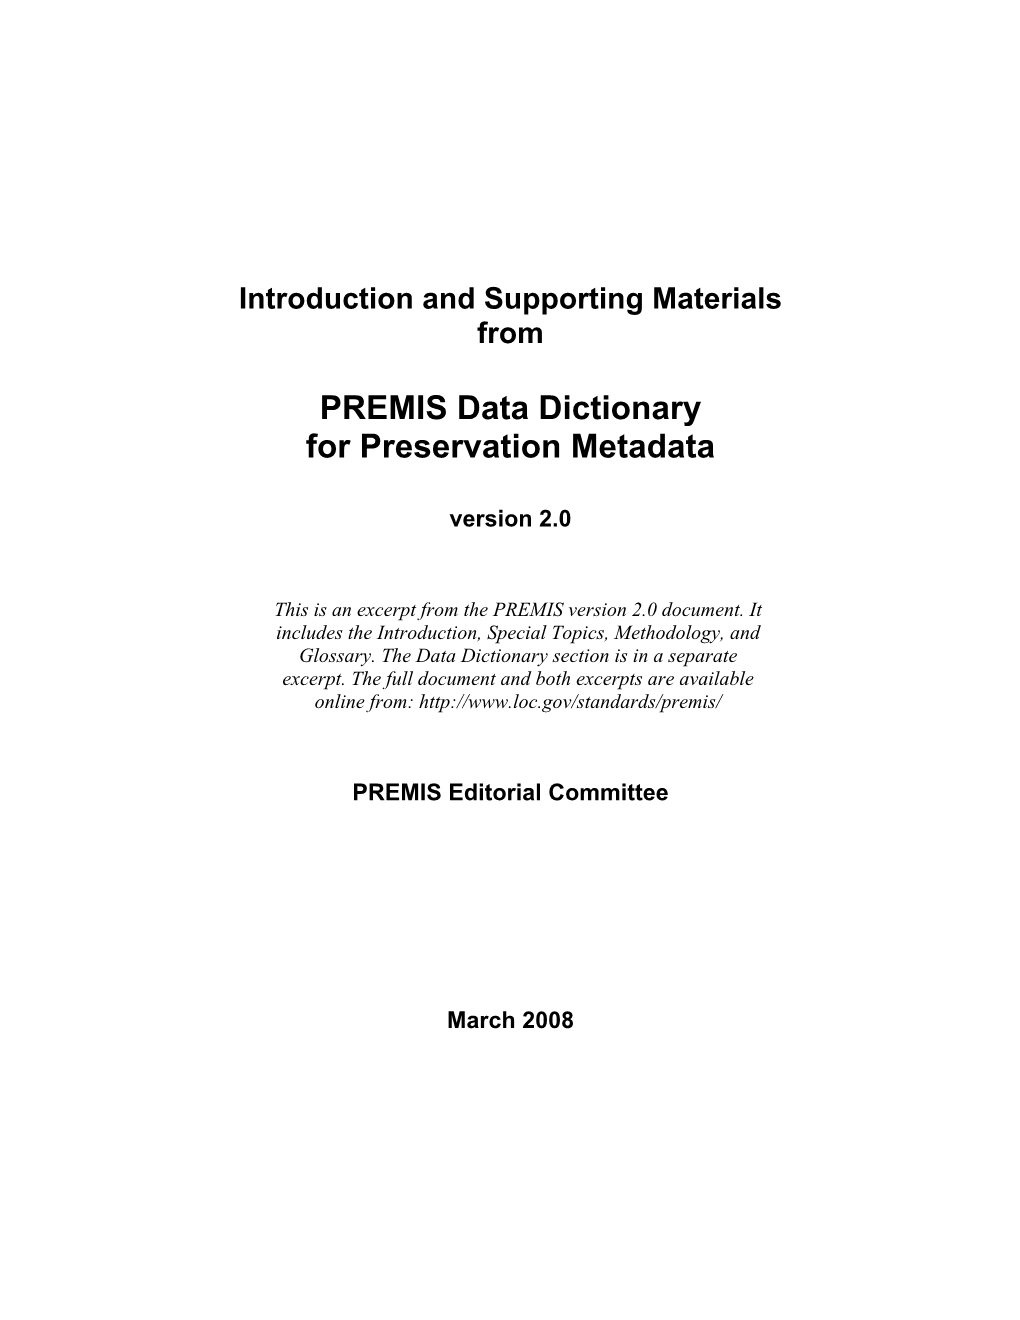 Introduction and Supporting Materials from PREMIS Data Dictionary Version 2